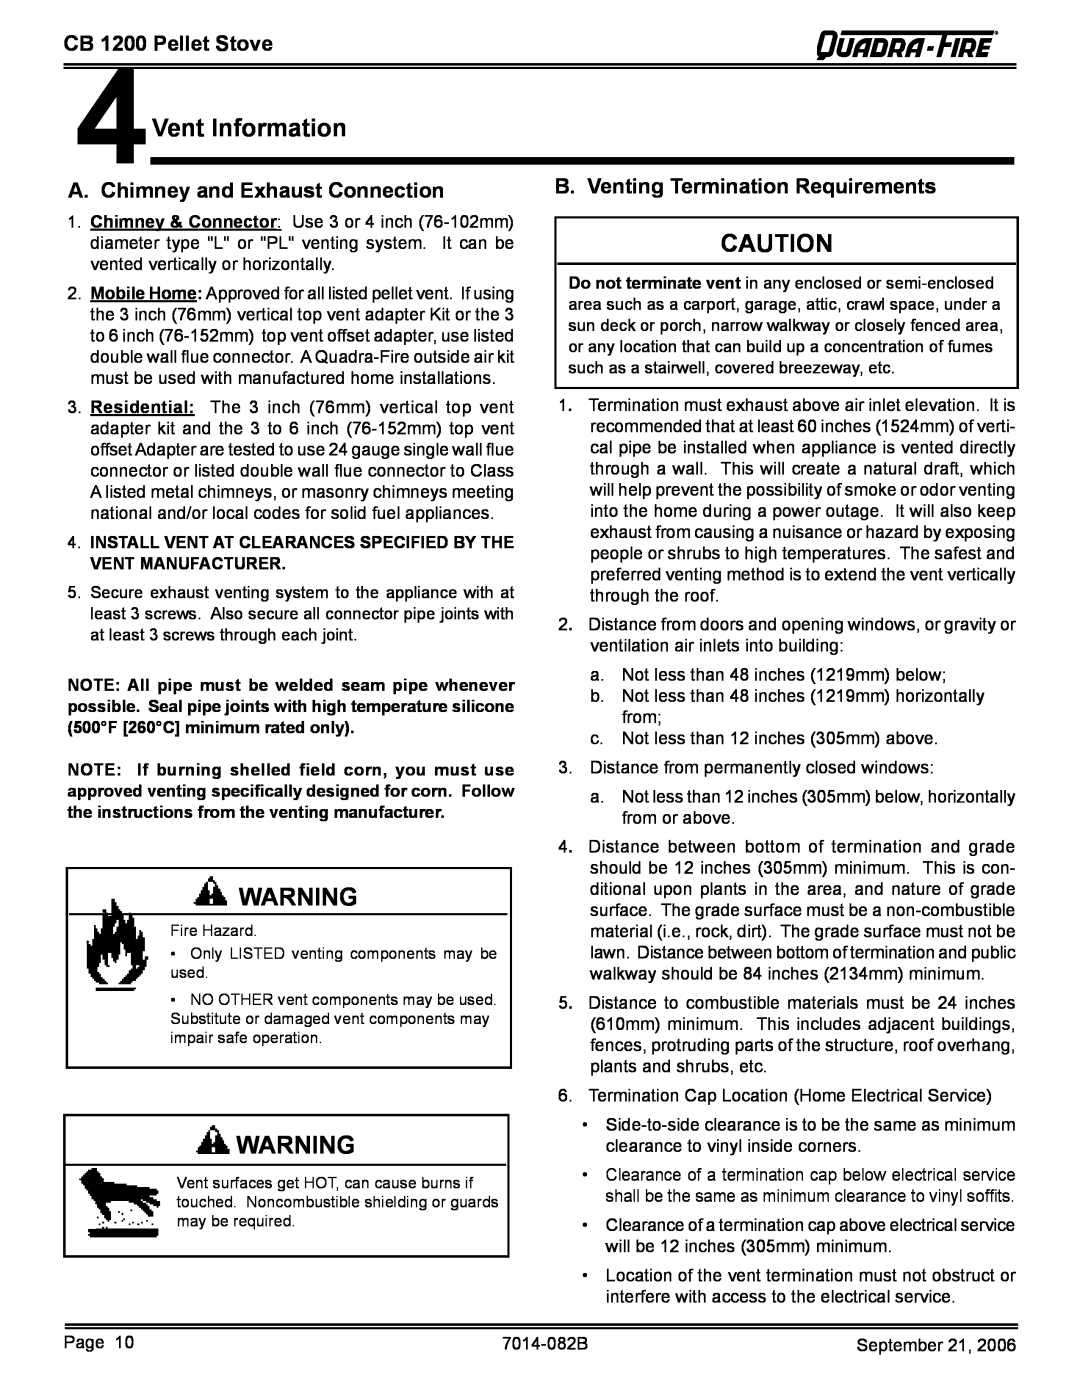 Quadra-Fire CB1200 owner manual Vent Information, Chimney and Exhaust Connection, B. Venting Termination Requirements 